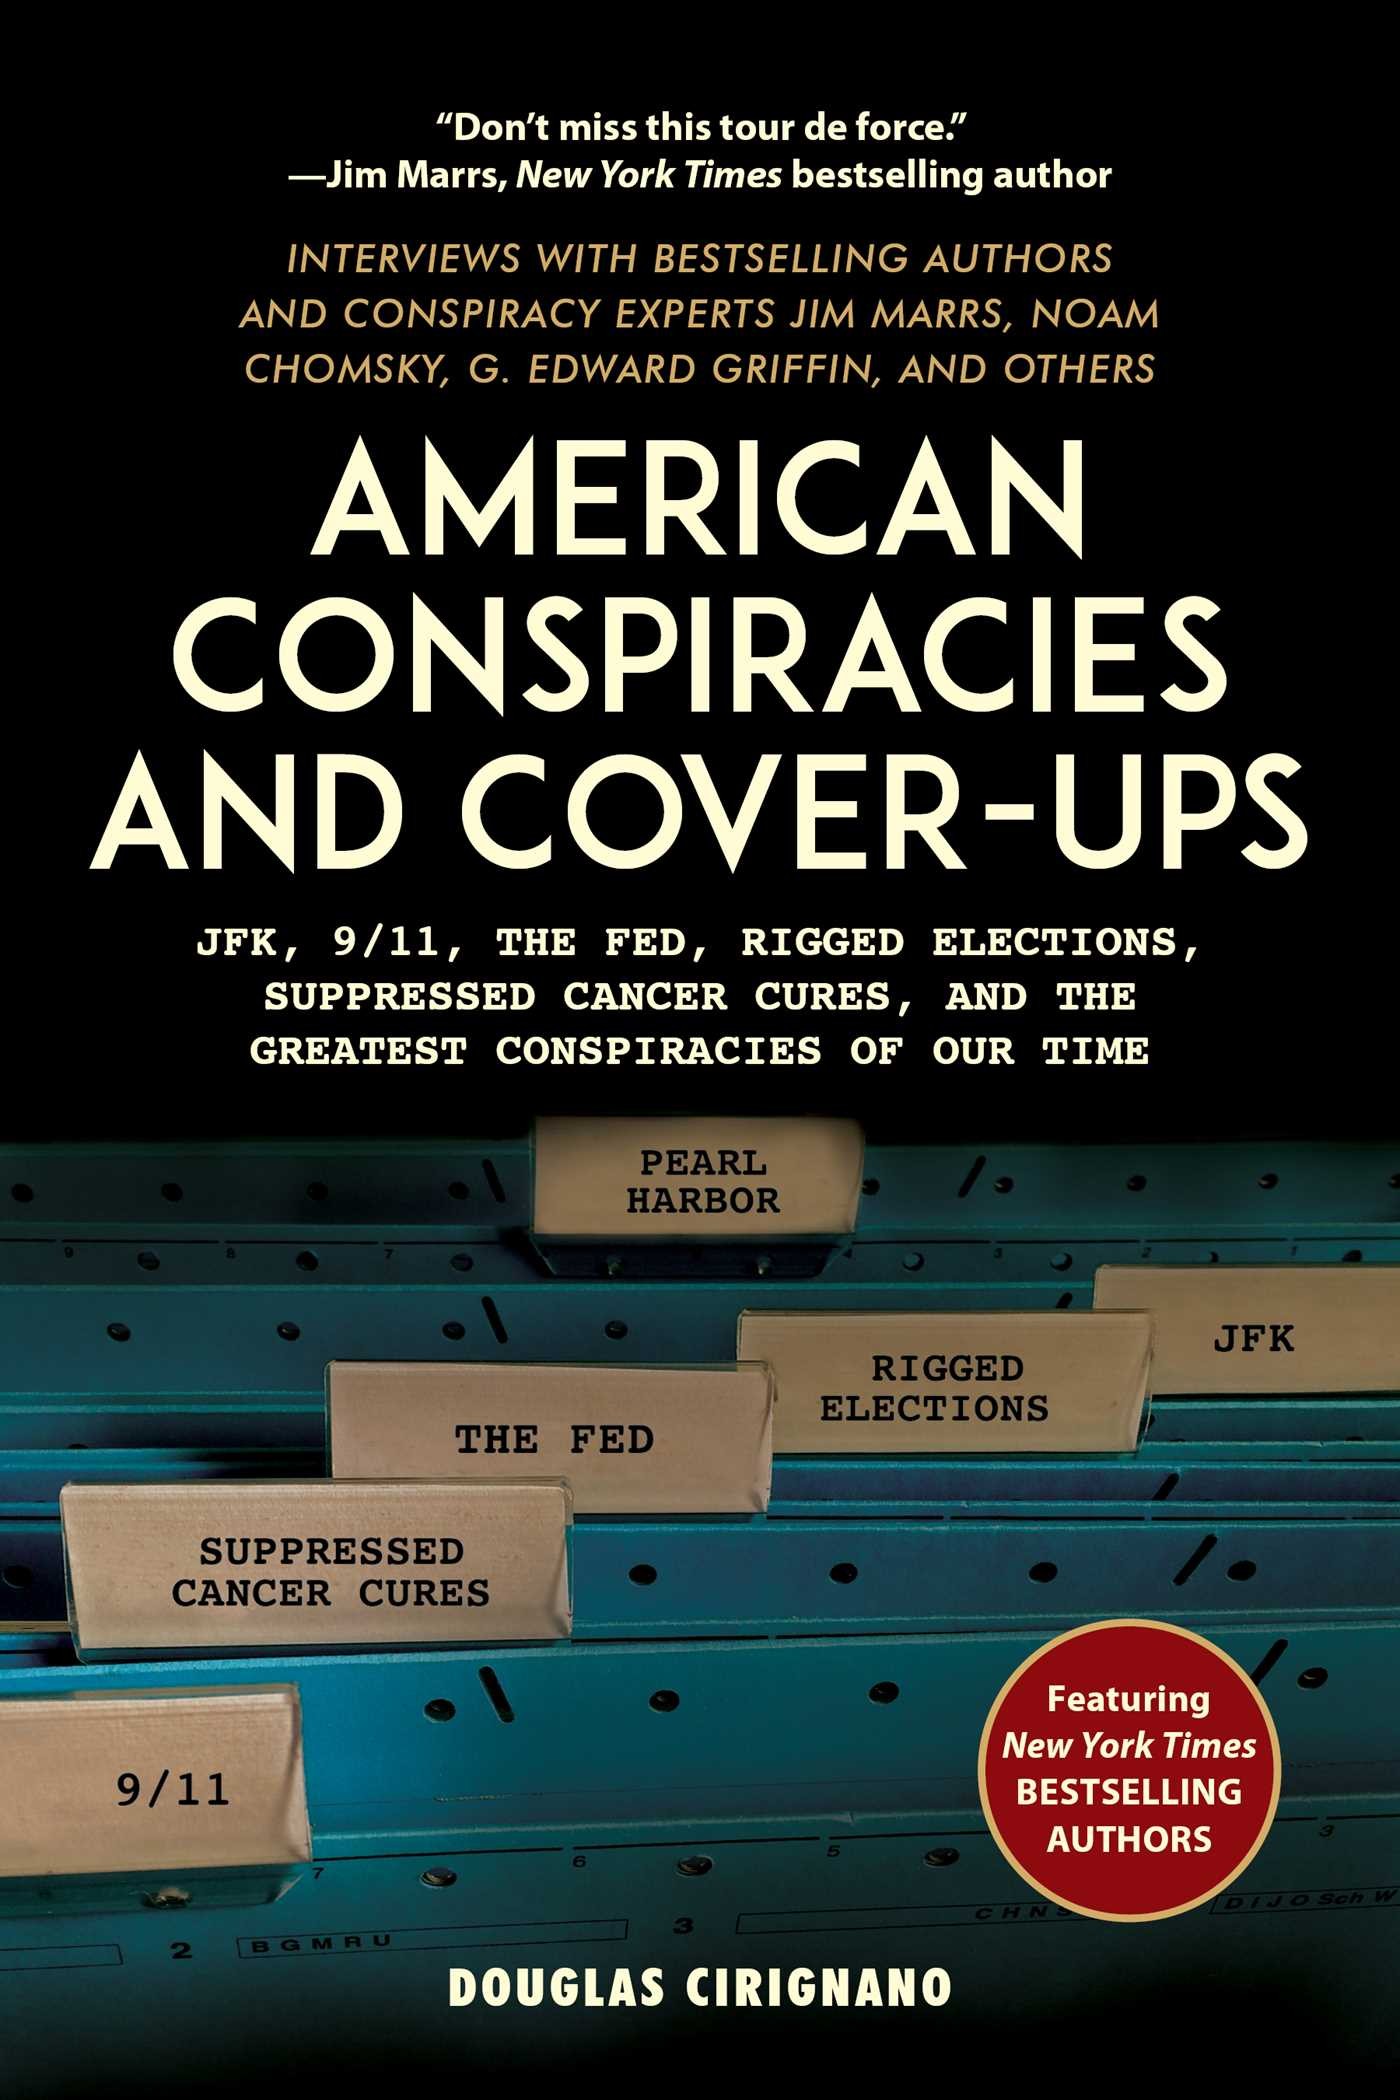 American Conspiracies and Cover-Ups: Interviews with Jim Marrs, Noam Chomsky, G. Edward Griffin, and Other Experts